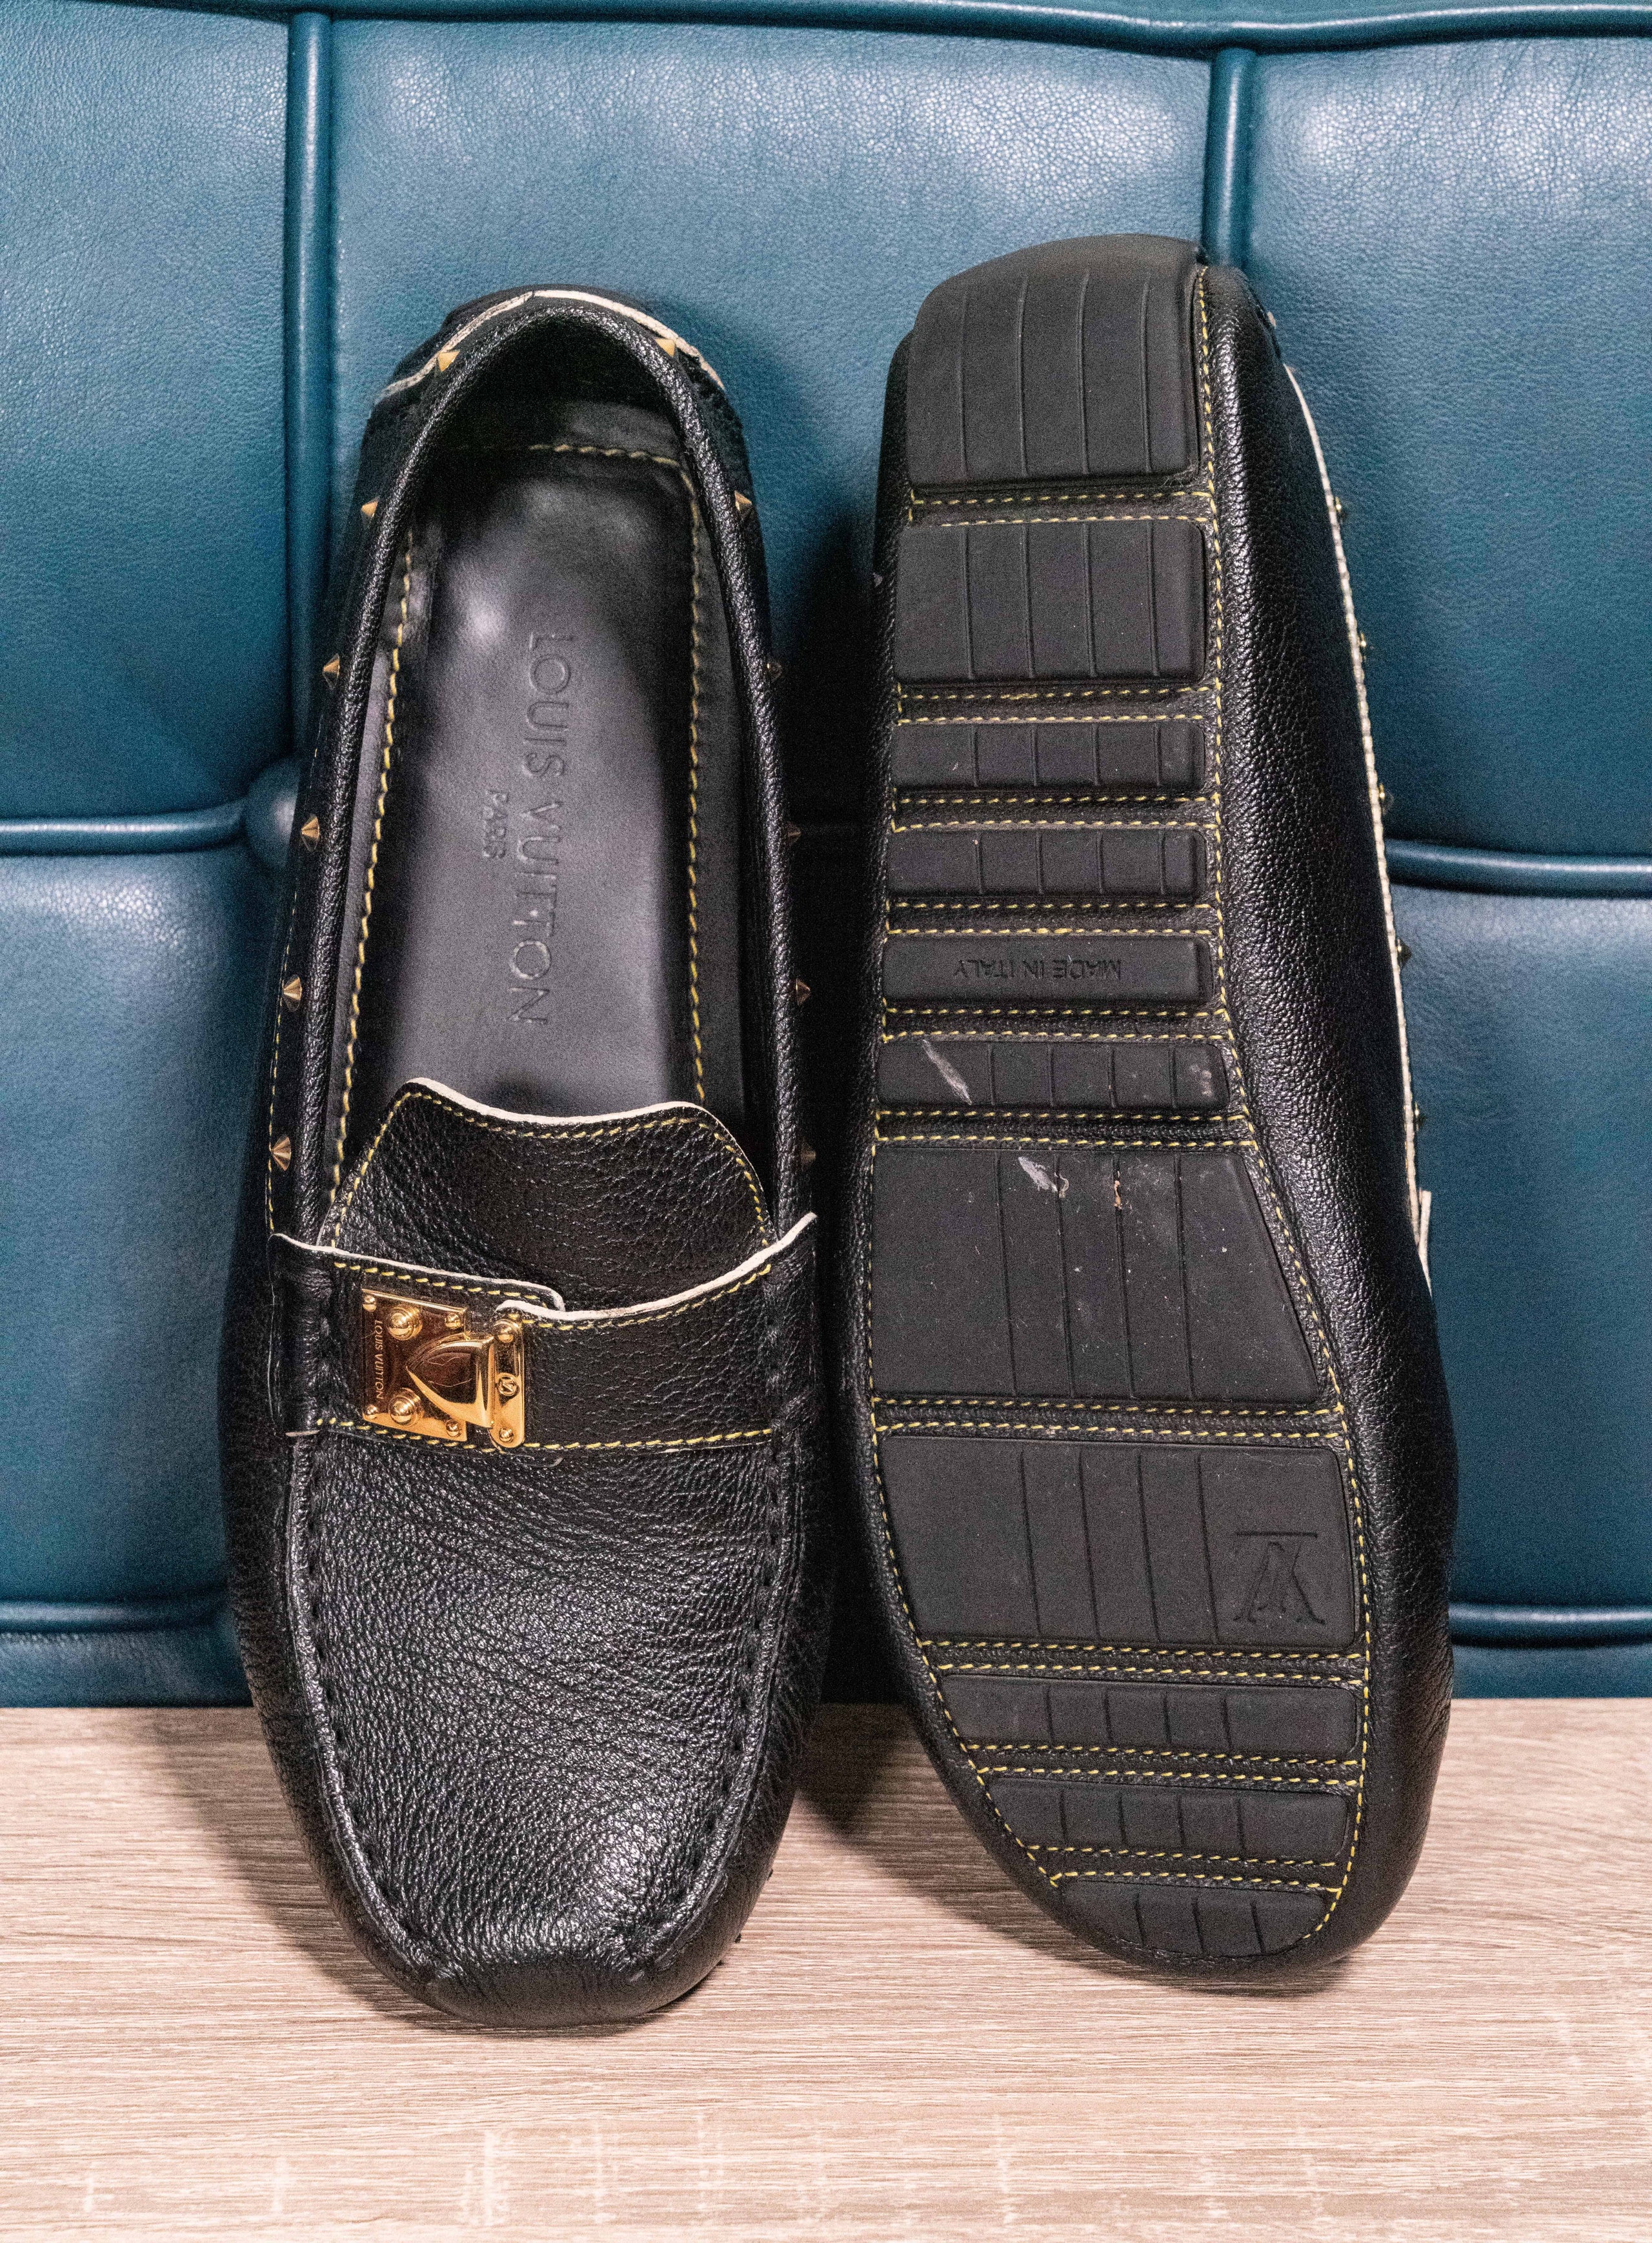 Branded Shoes for Women, Loafer Shoes, Louis Vuitton Gold Studded Suhali Black  Loafers, ReAdore Shop